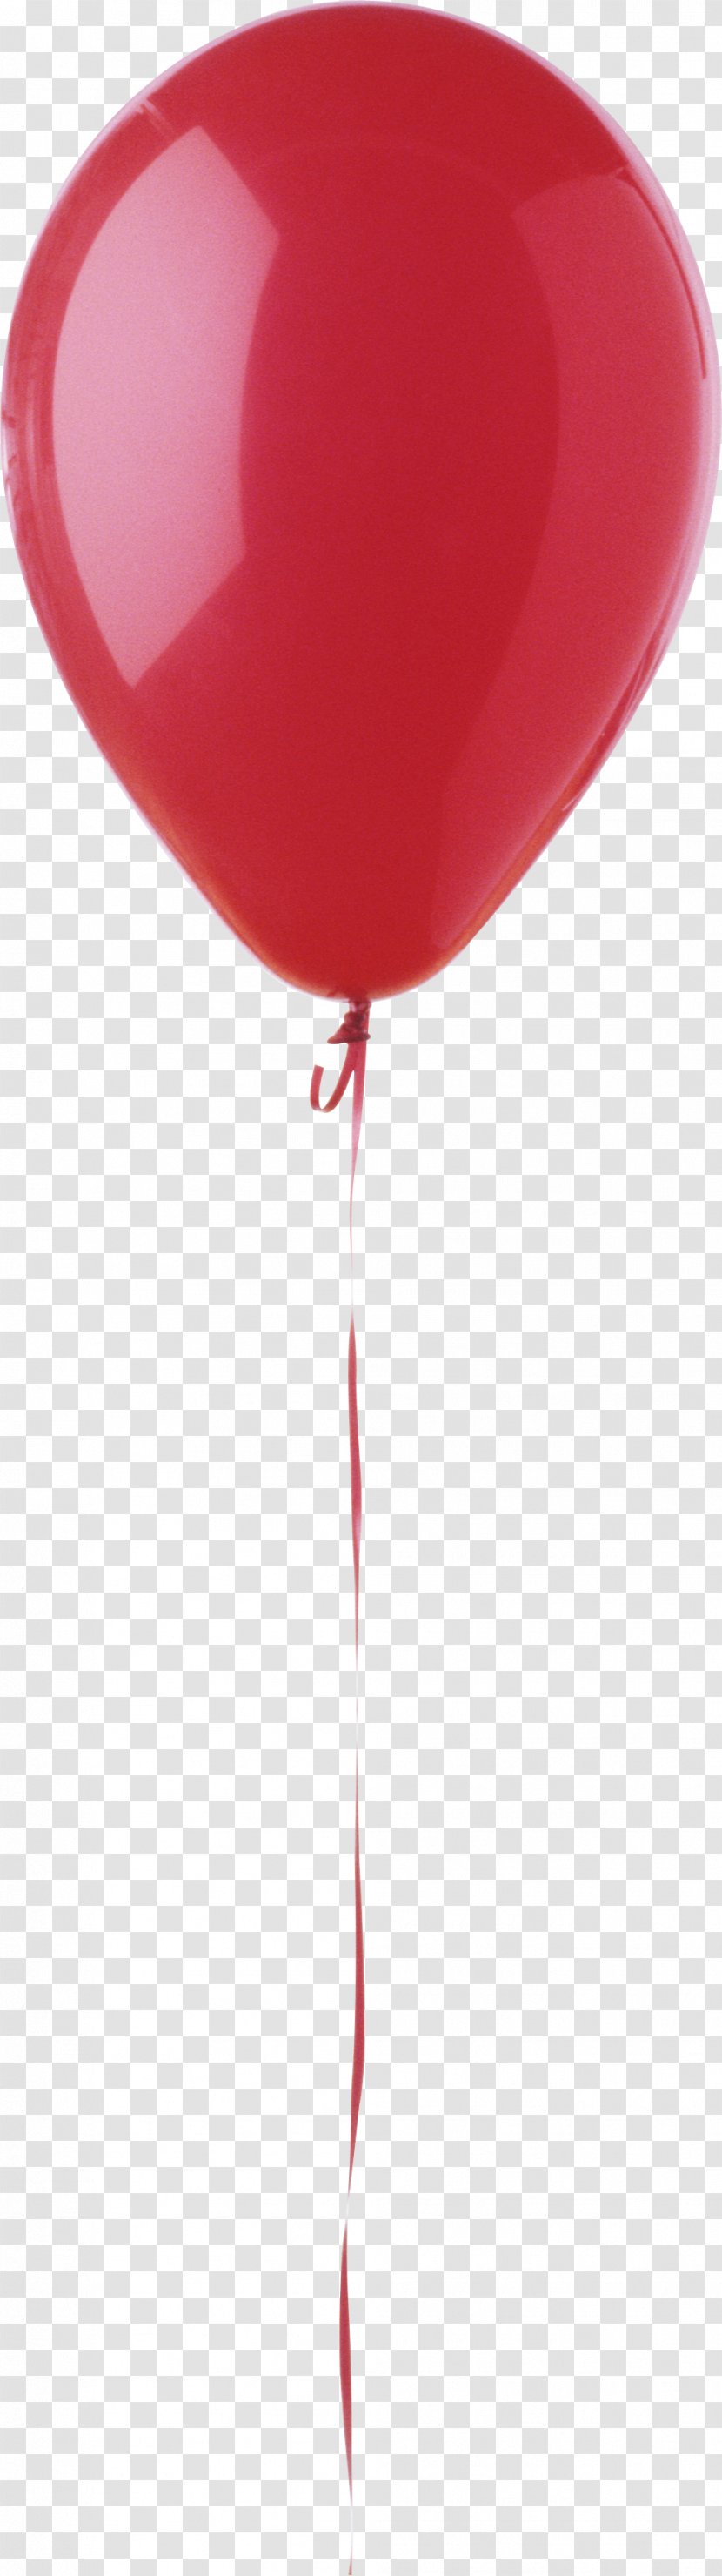 United States Red Line Frank Moses Authentic Mexican - The Balloon - Balloons Image Transparent PNG